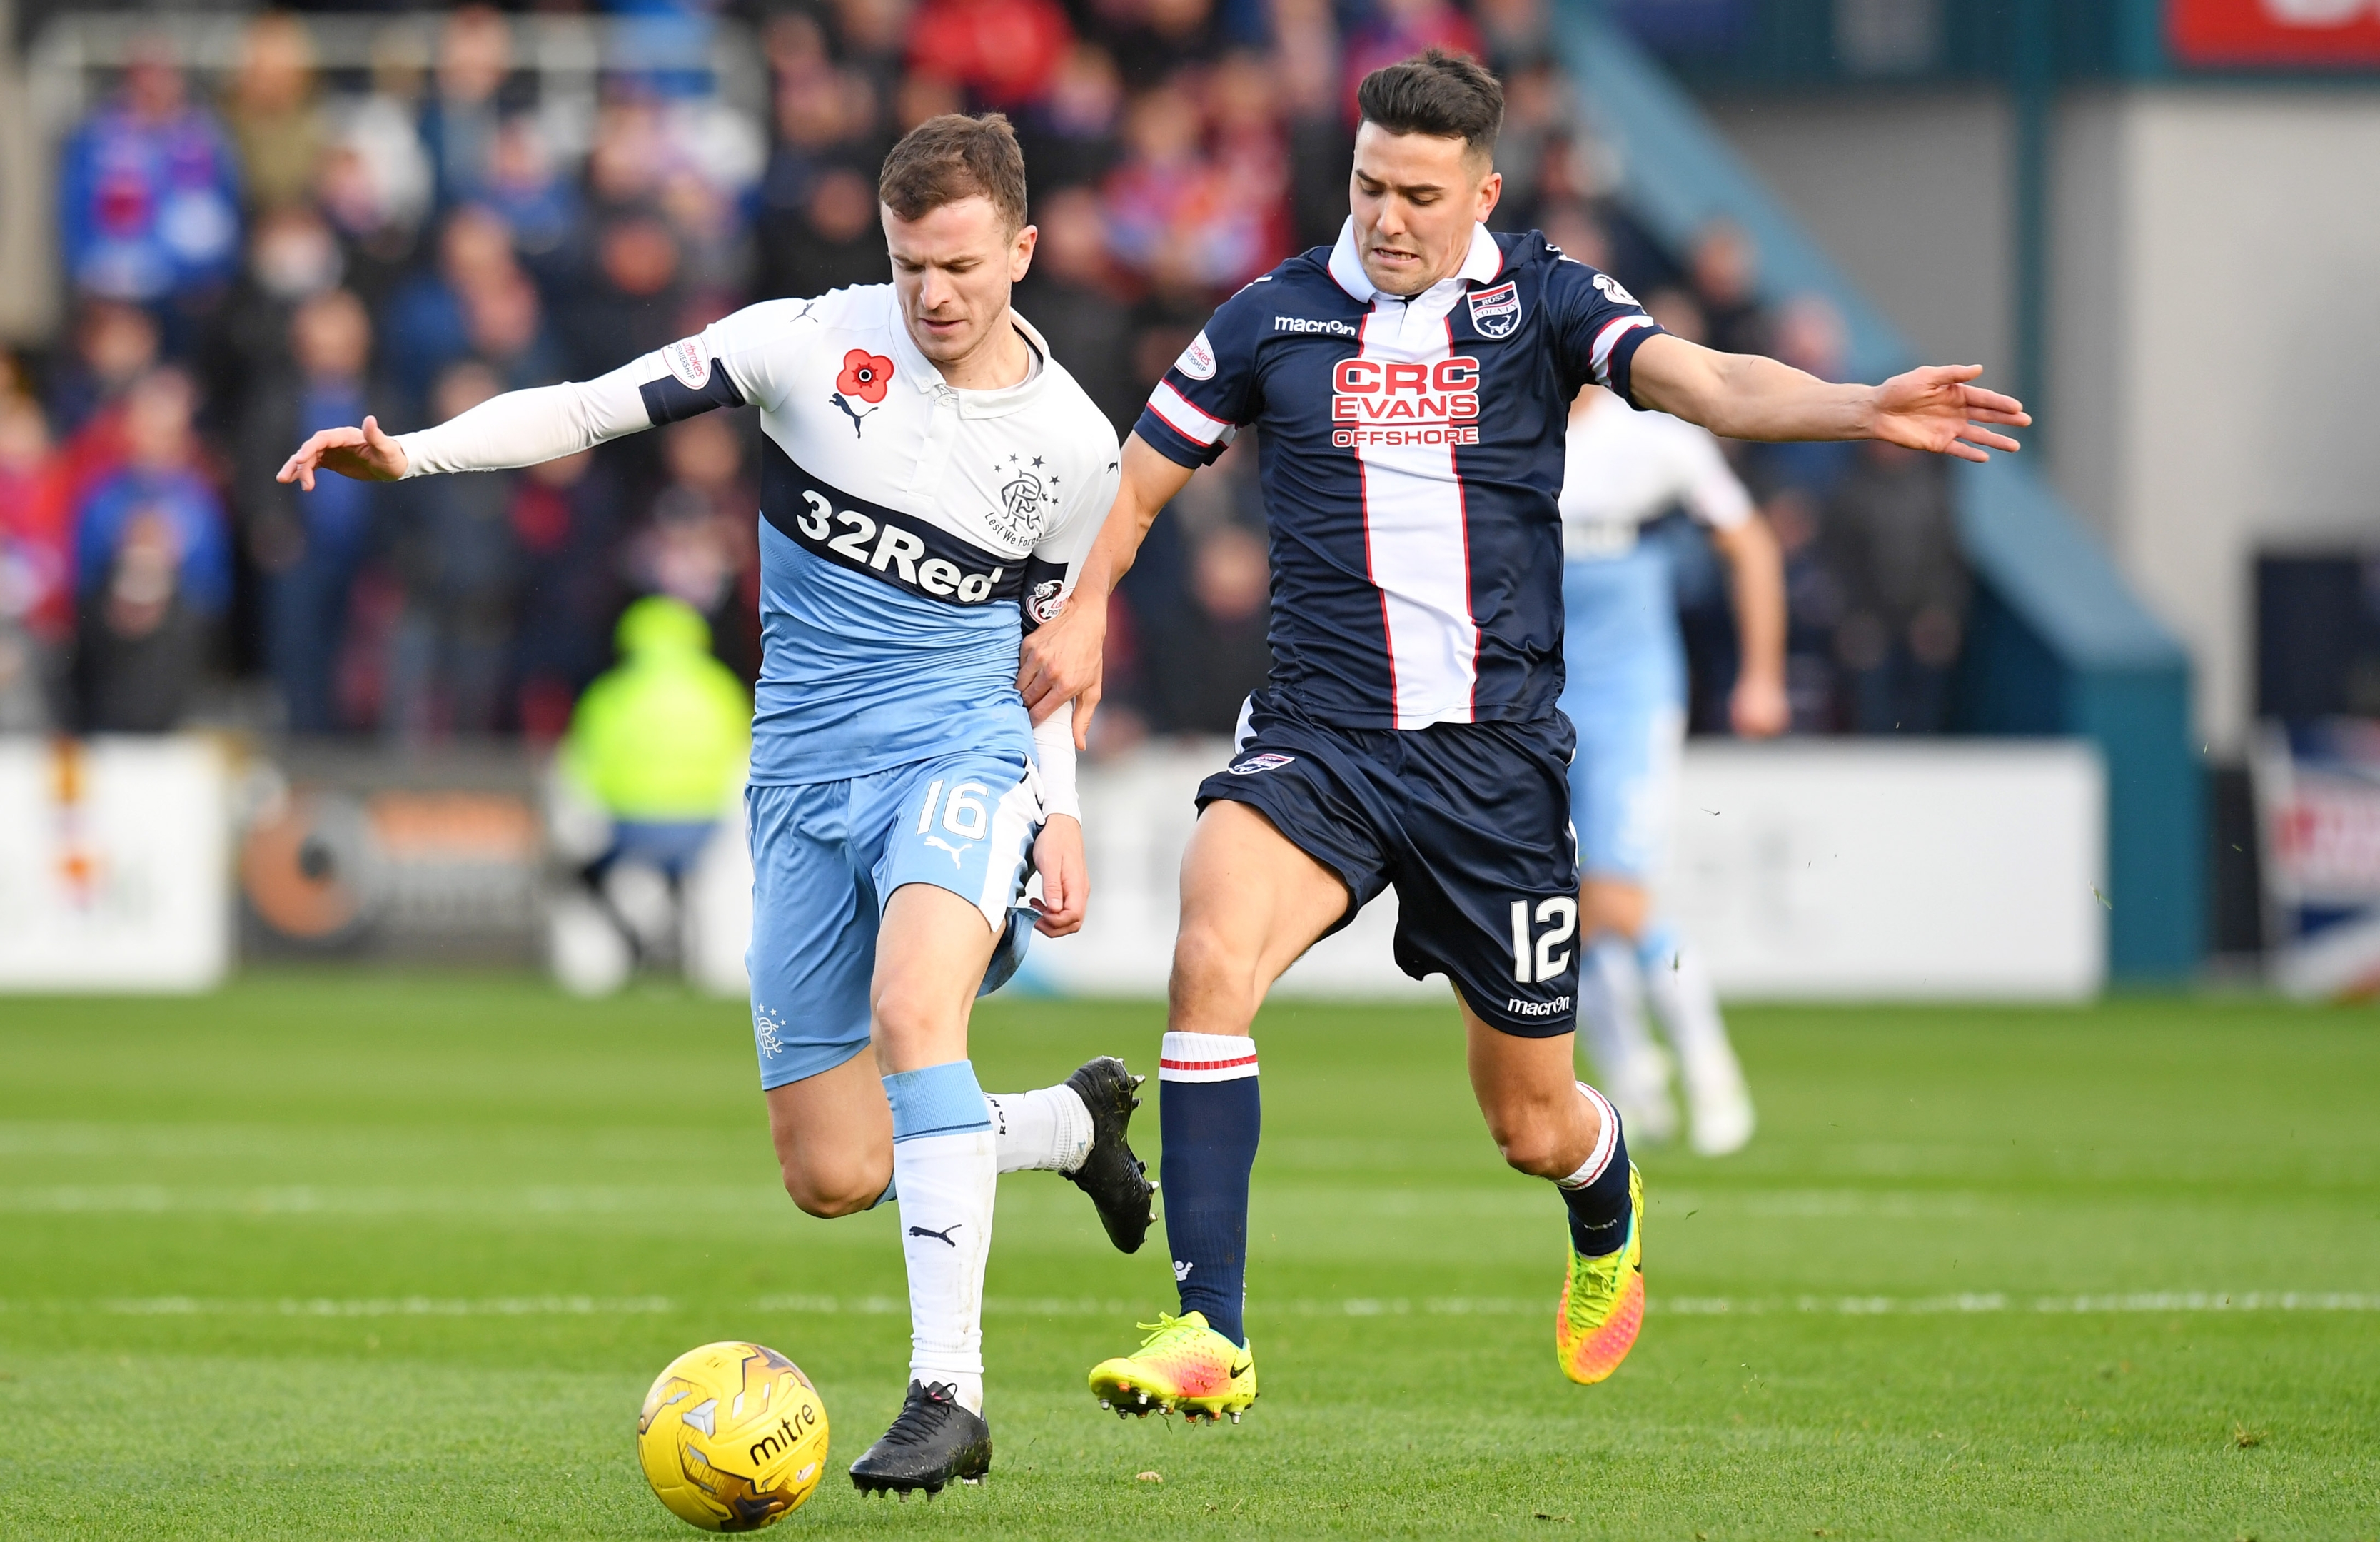 Ross County midfielder Tim Chow was sent off.